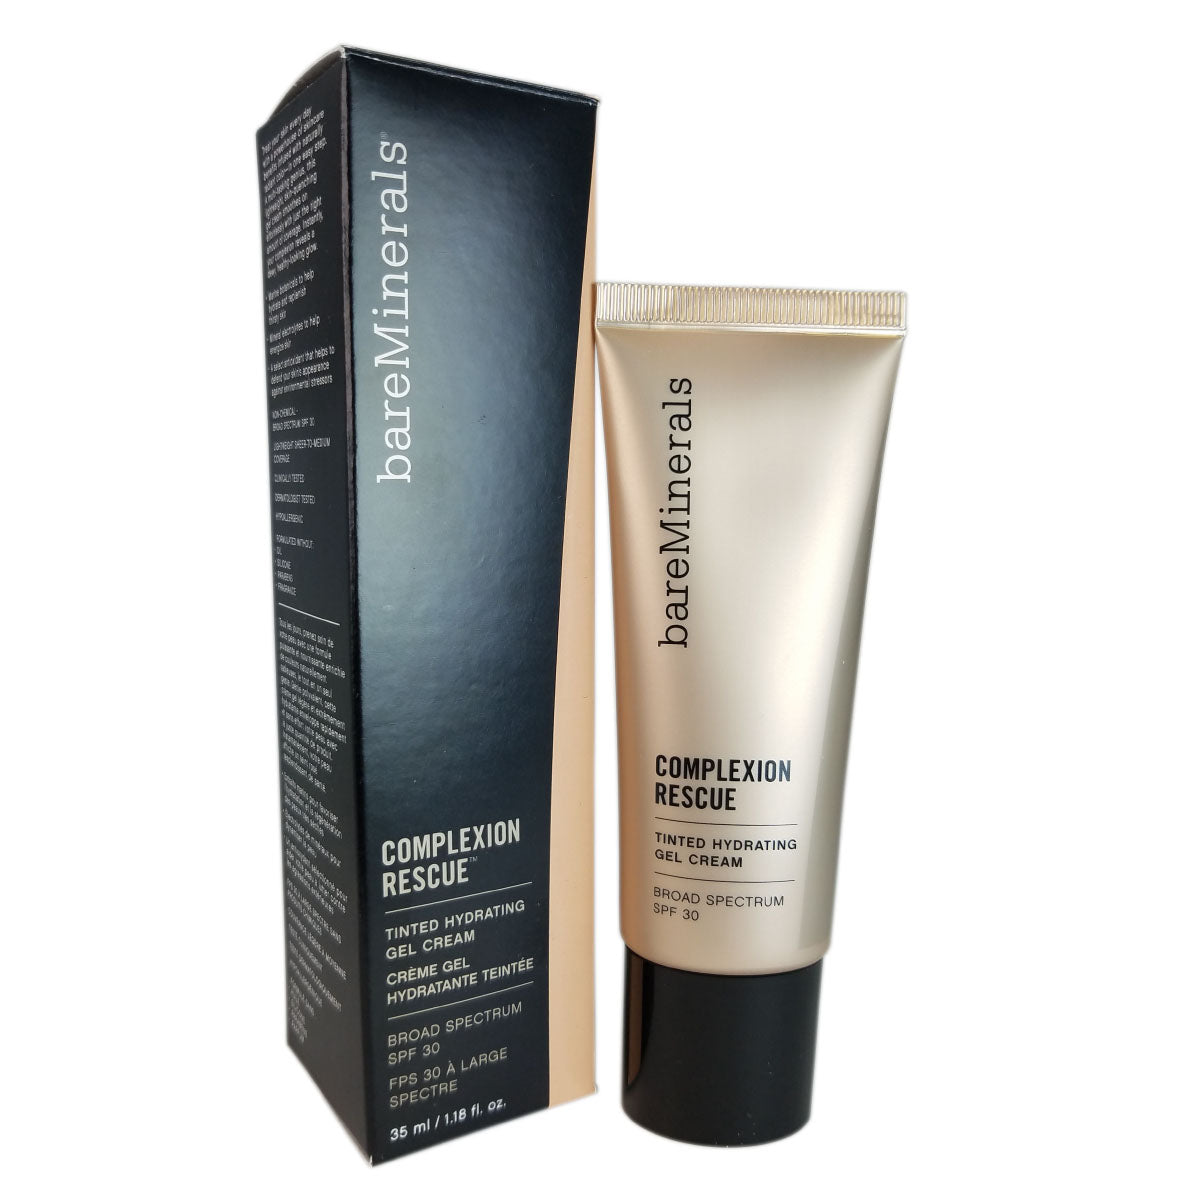 BareMinerals Complexion Rescue Tinted Hydrating Gel Cream - Suede 04 - 1.18 oz